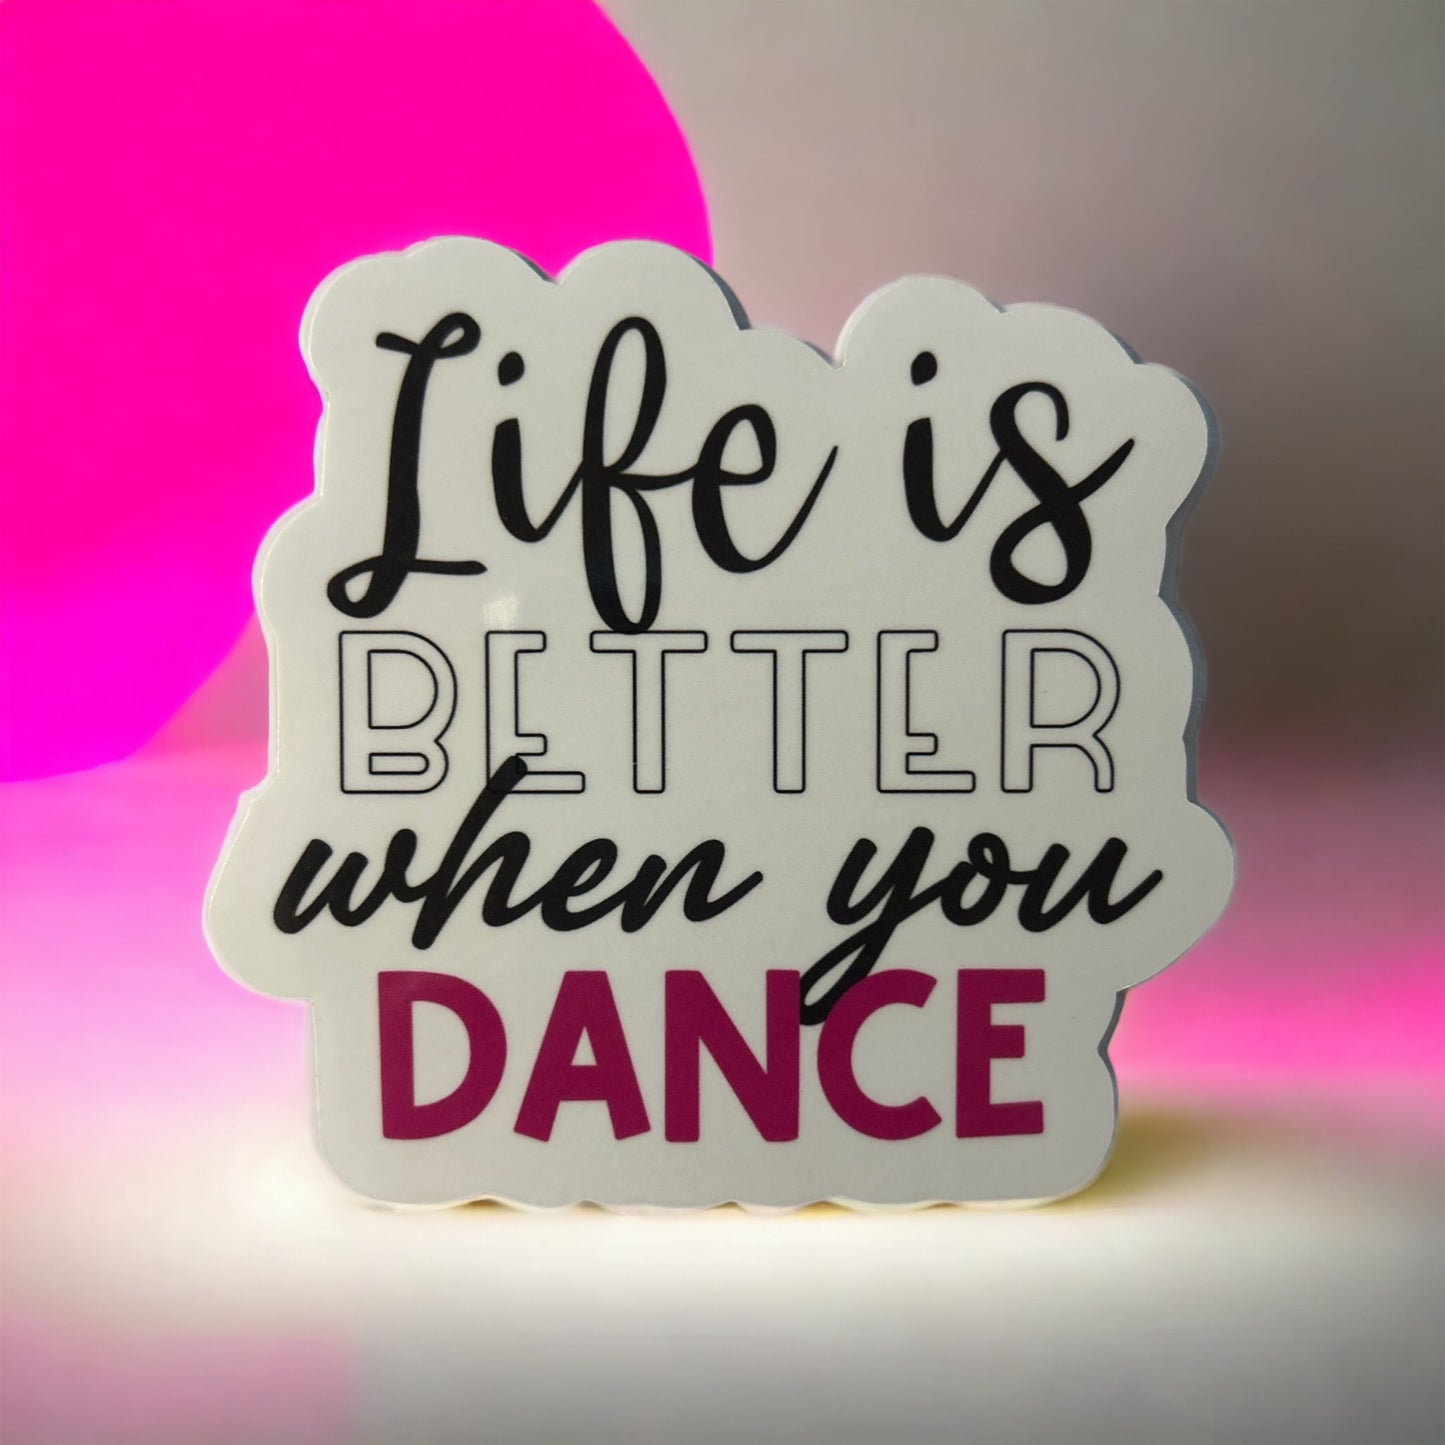 Life is Better when you Dance sticker or magnet